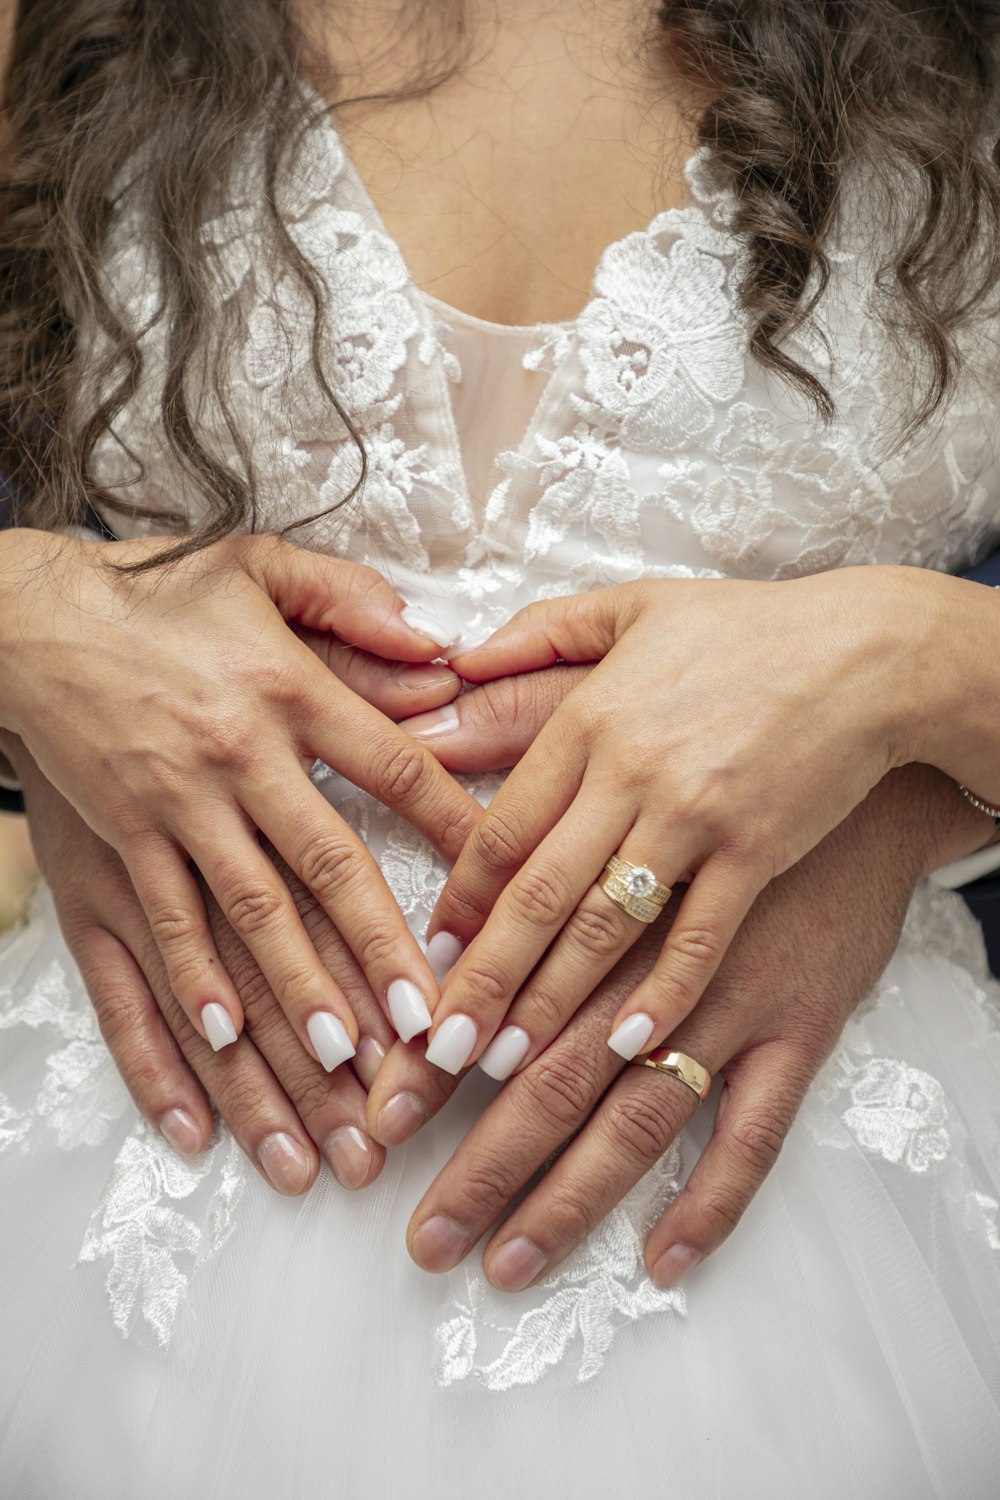 a woman in a wedding dress holding her hands together